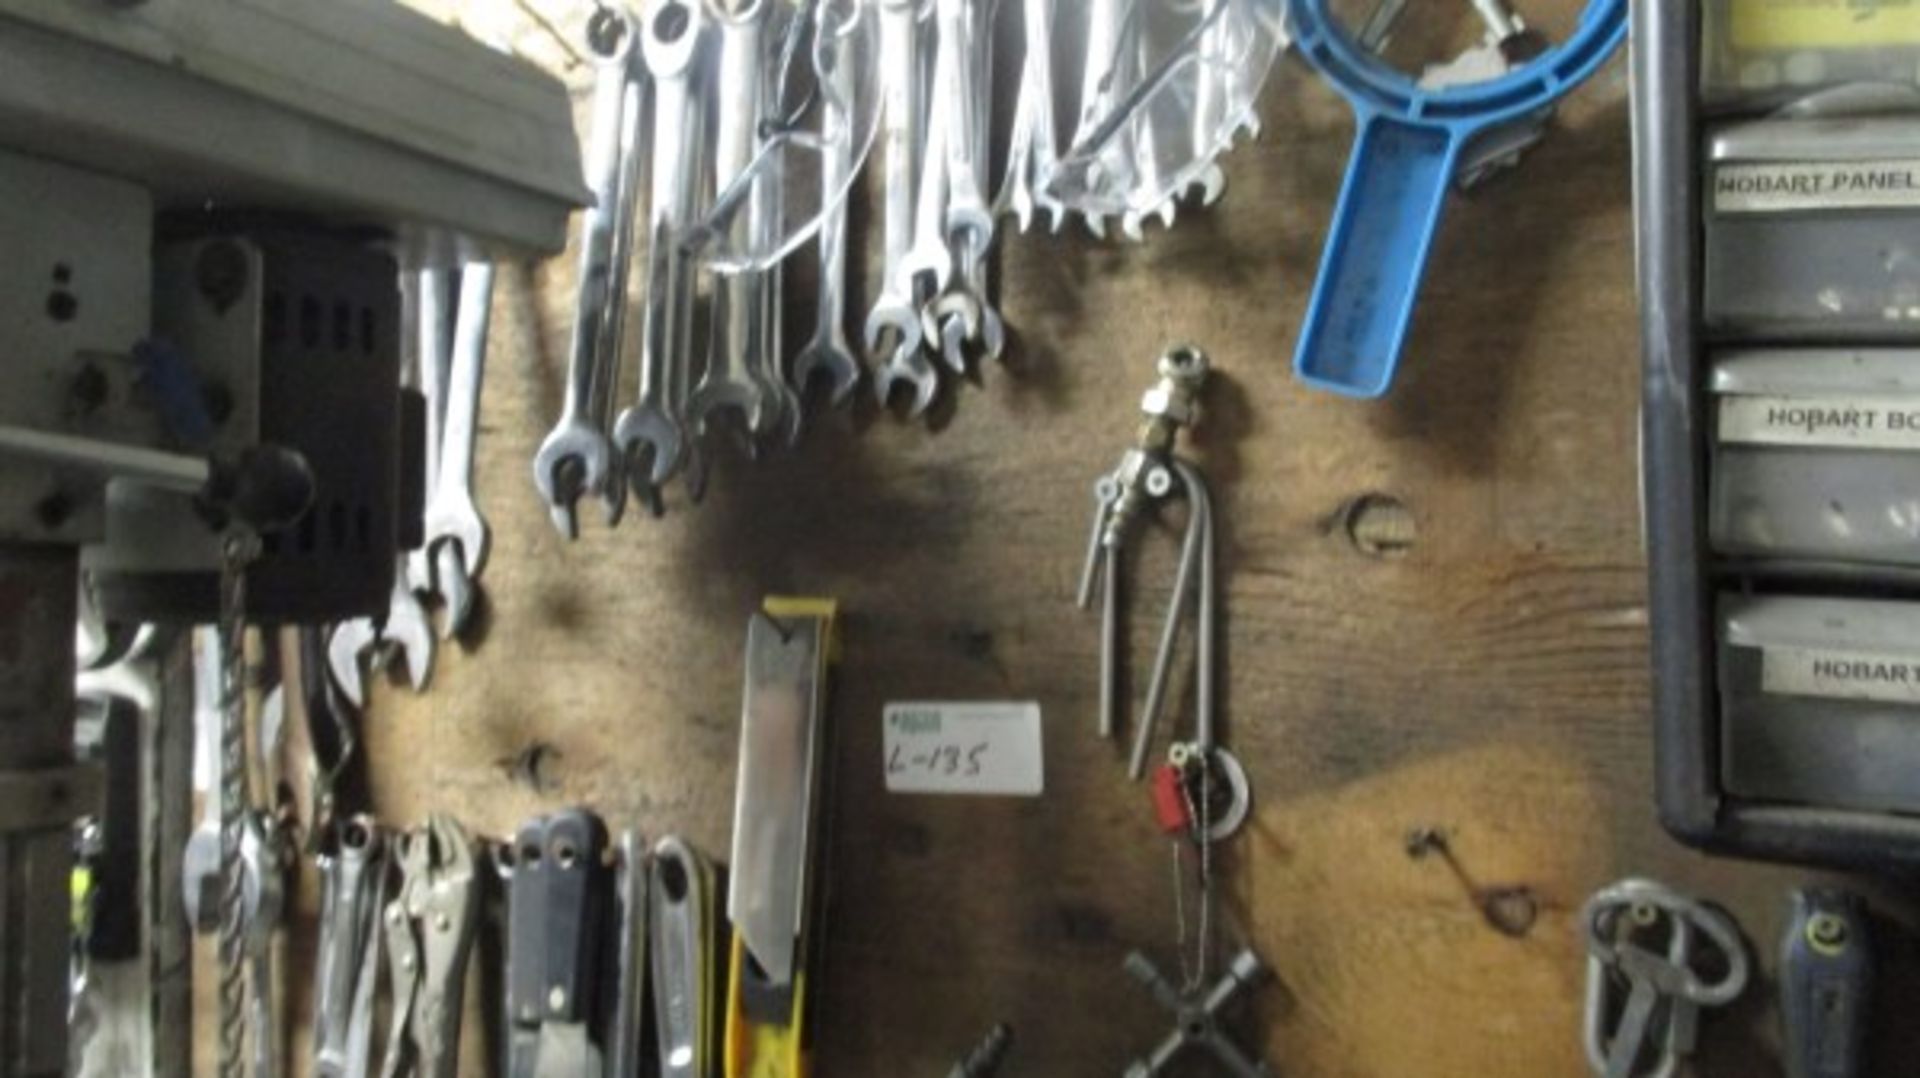 WALL HANGING LOT OF SCREWDRIVERS, WRENCHES, 2' SQUARE, VICE GRIPS ETC - Image 2 of 3